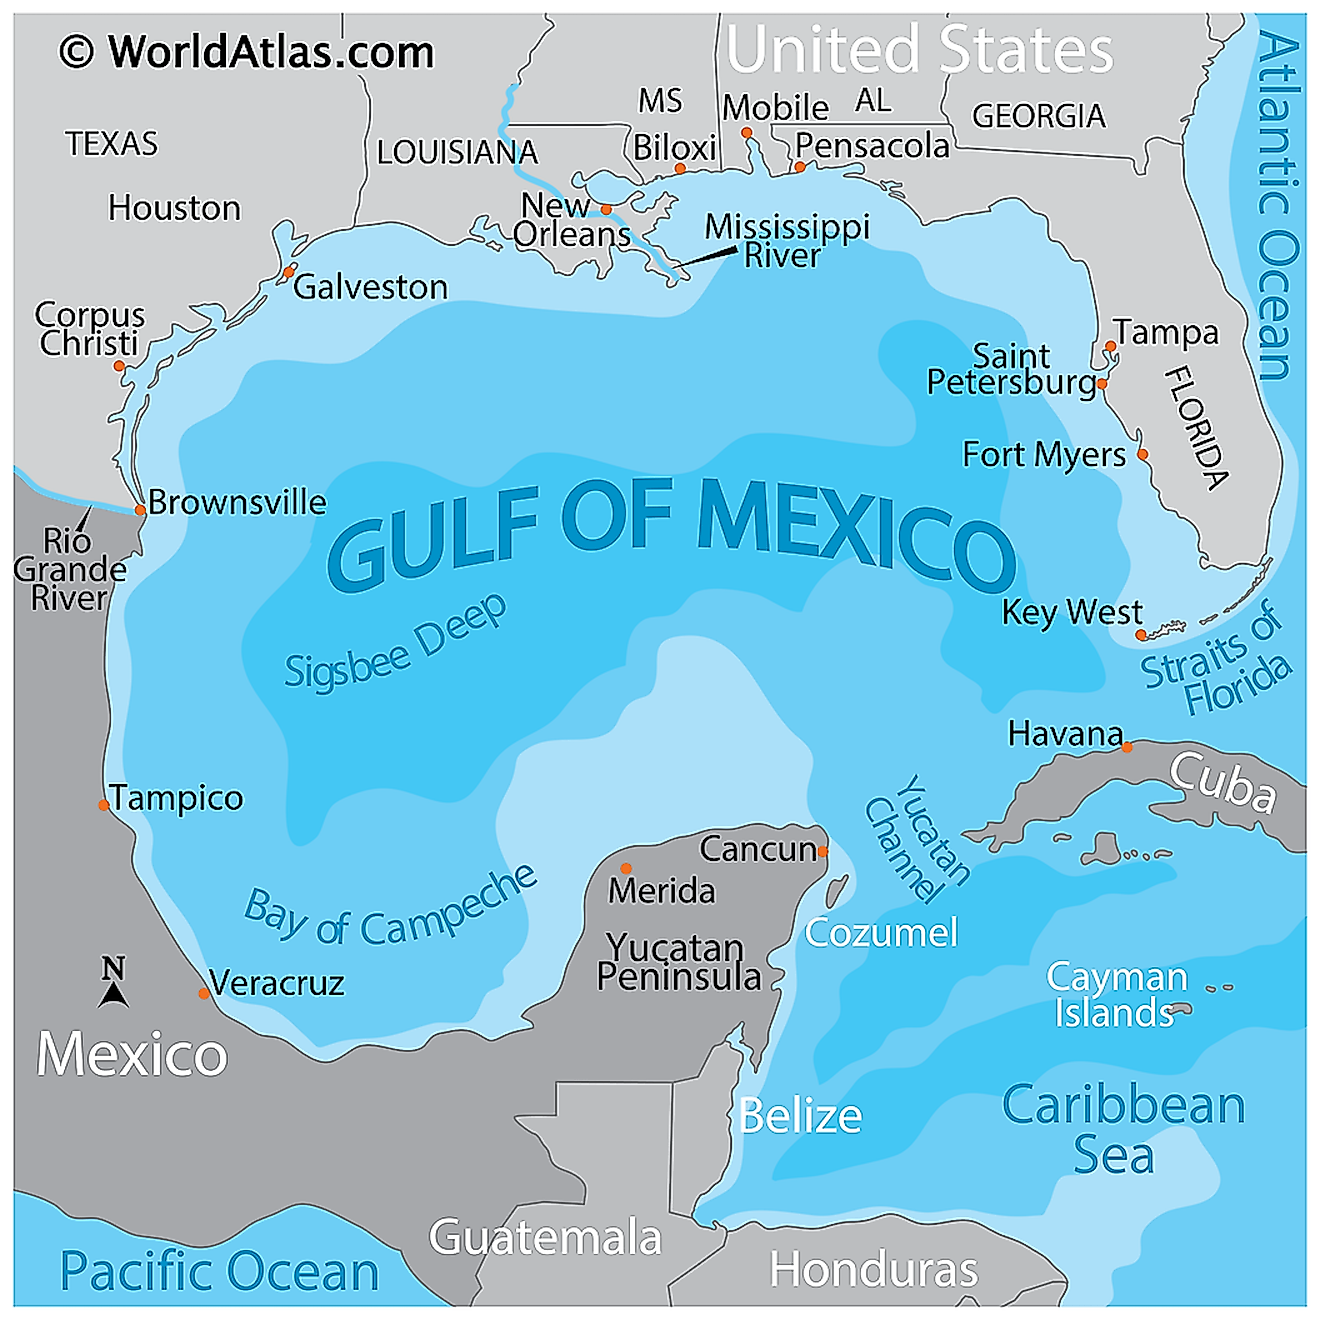 Gulf of Mexico map.